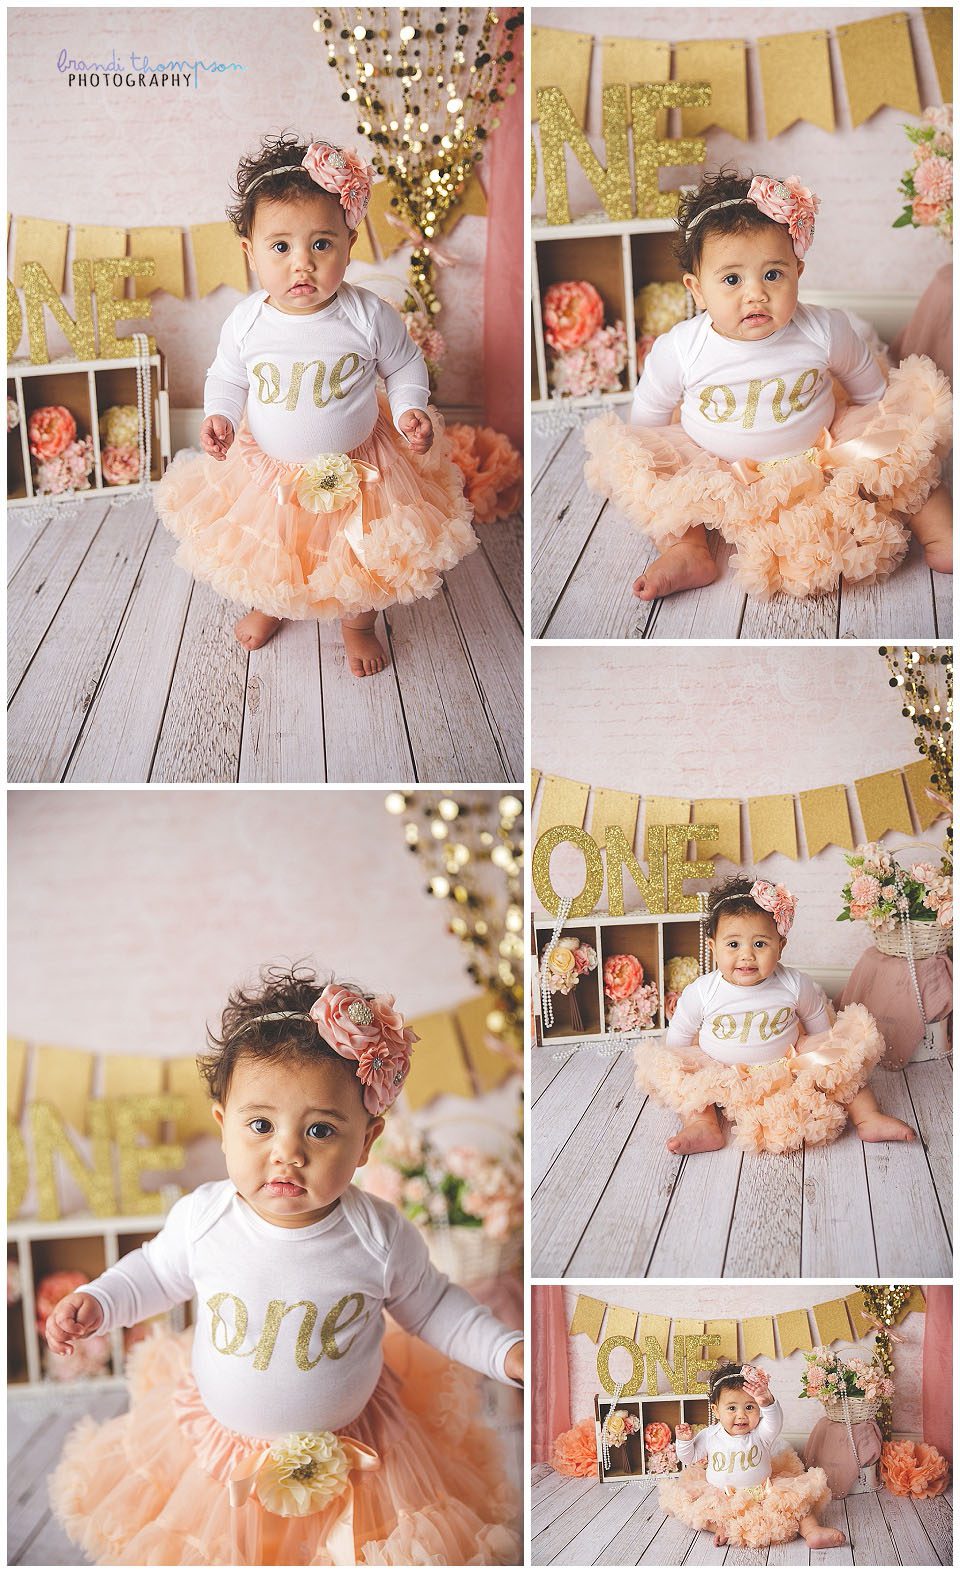 studio cake smash session with pink, peach, white and gold, and flowers. A medium skinned baby girl with curly brown hair